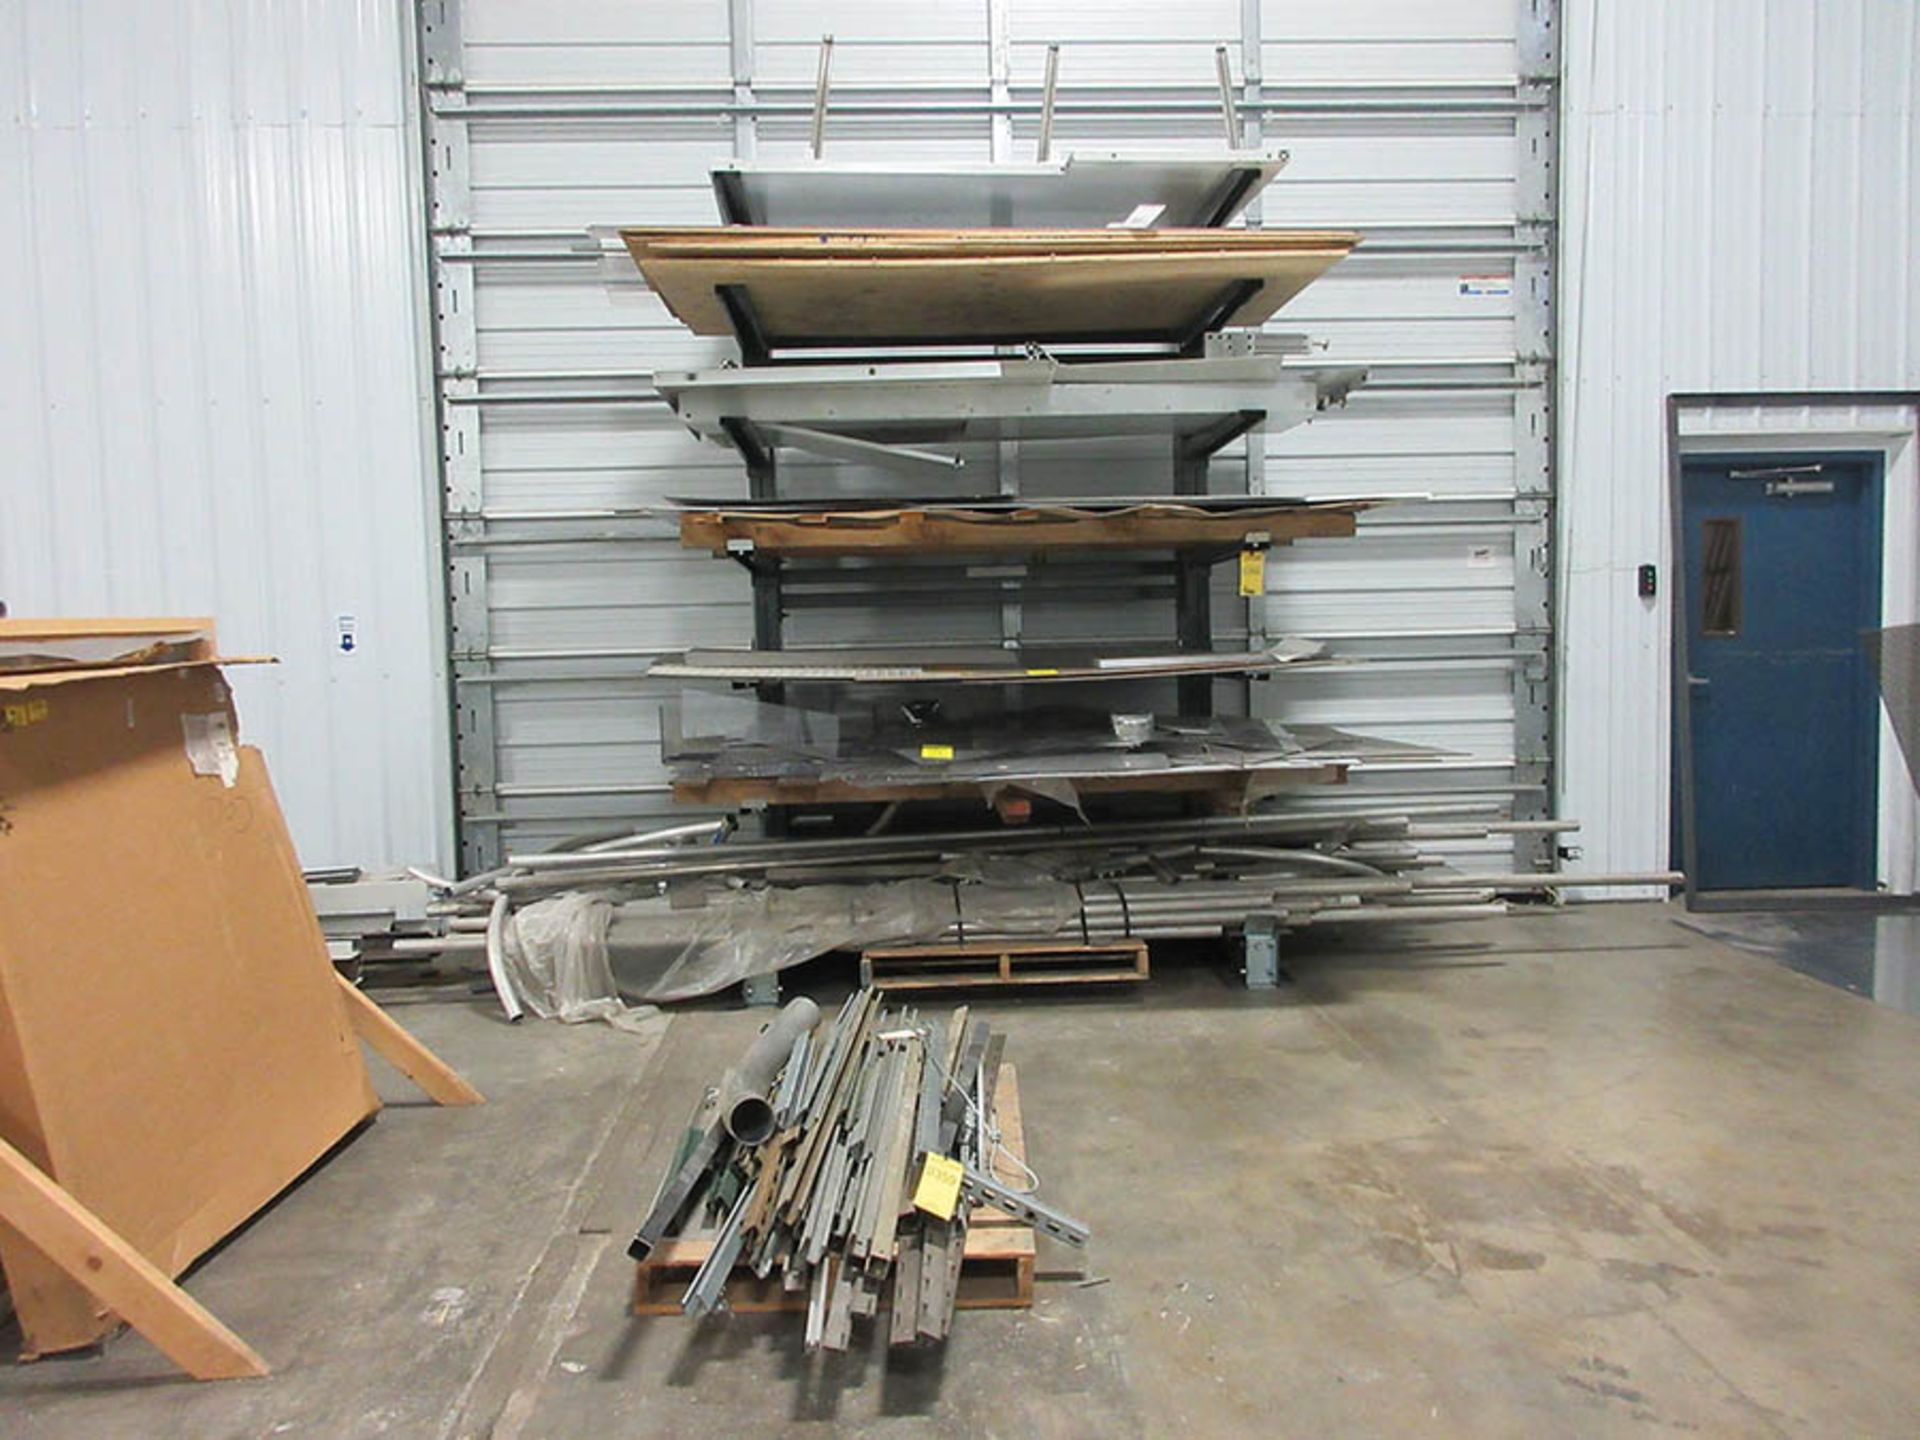 CONTENTS OF CANTILEVER RACK - CONDUIT, DIAMOND PLATE, LEXAN, AND PLYWOOD